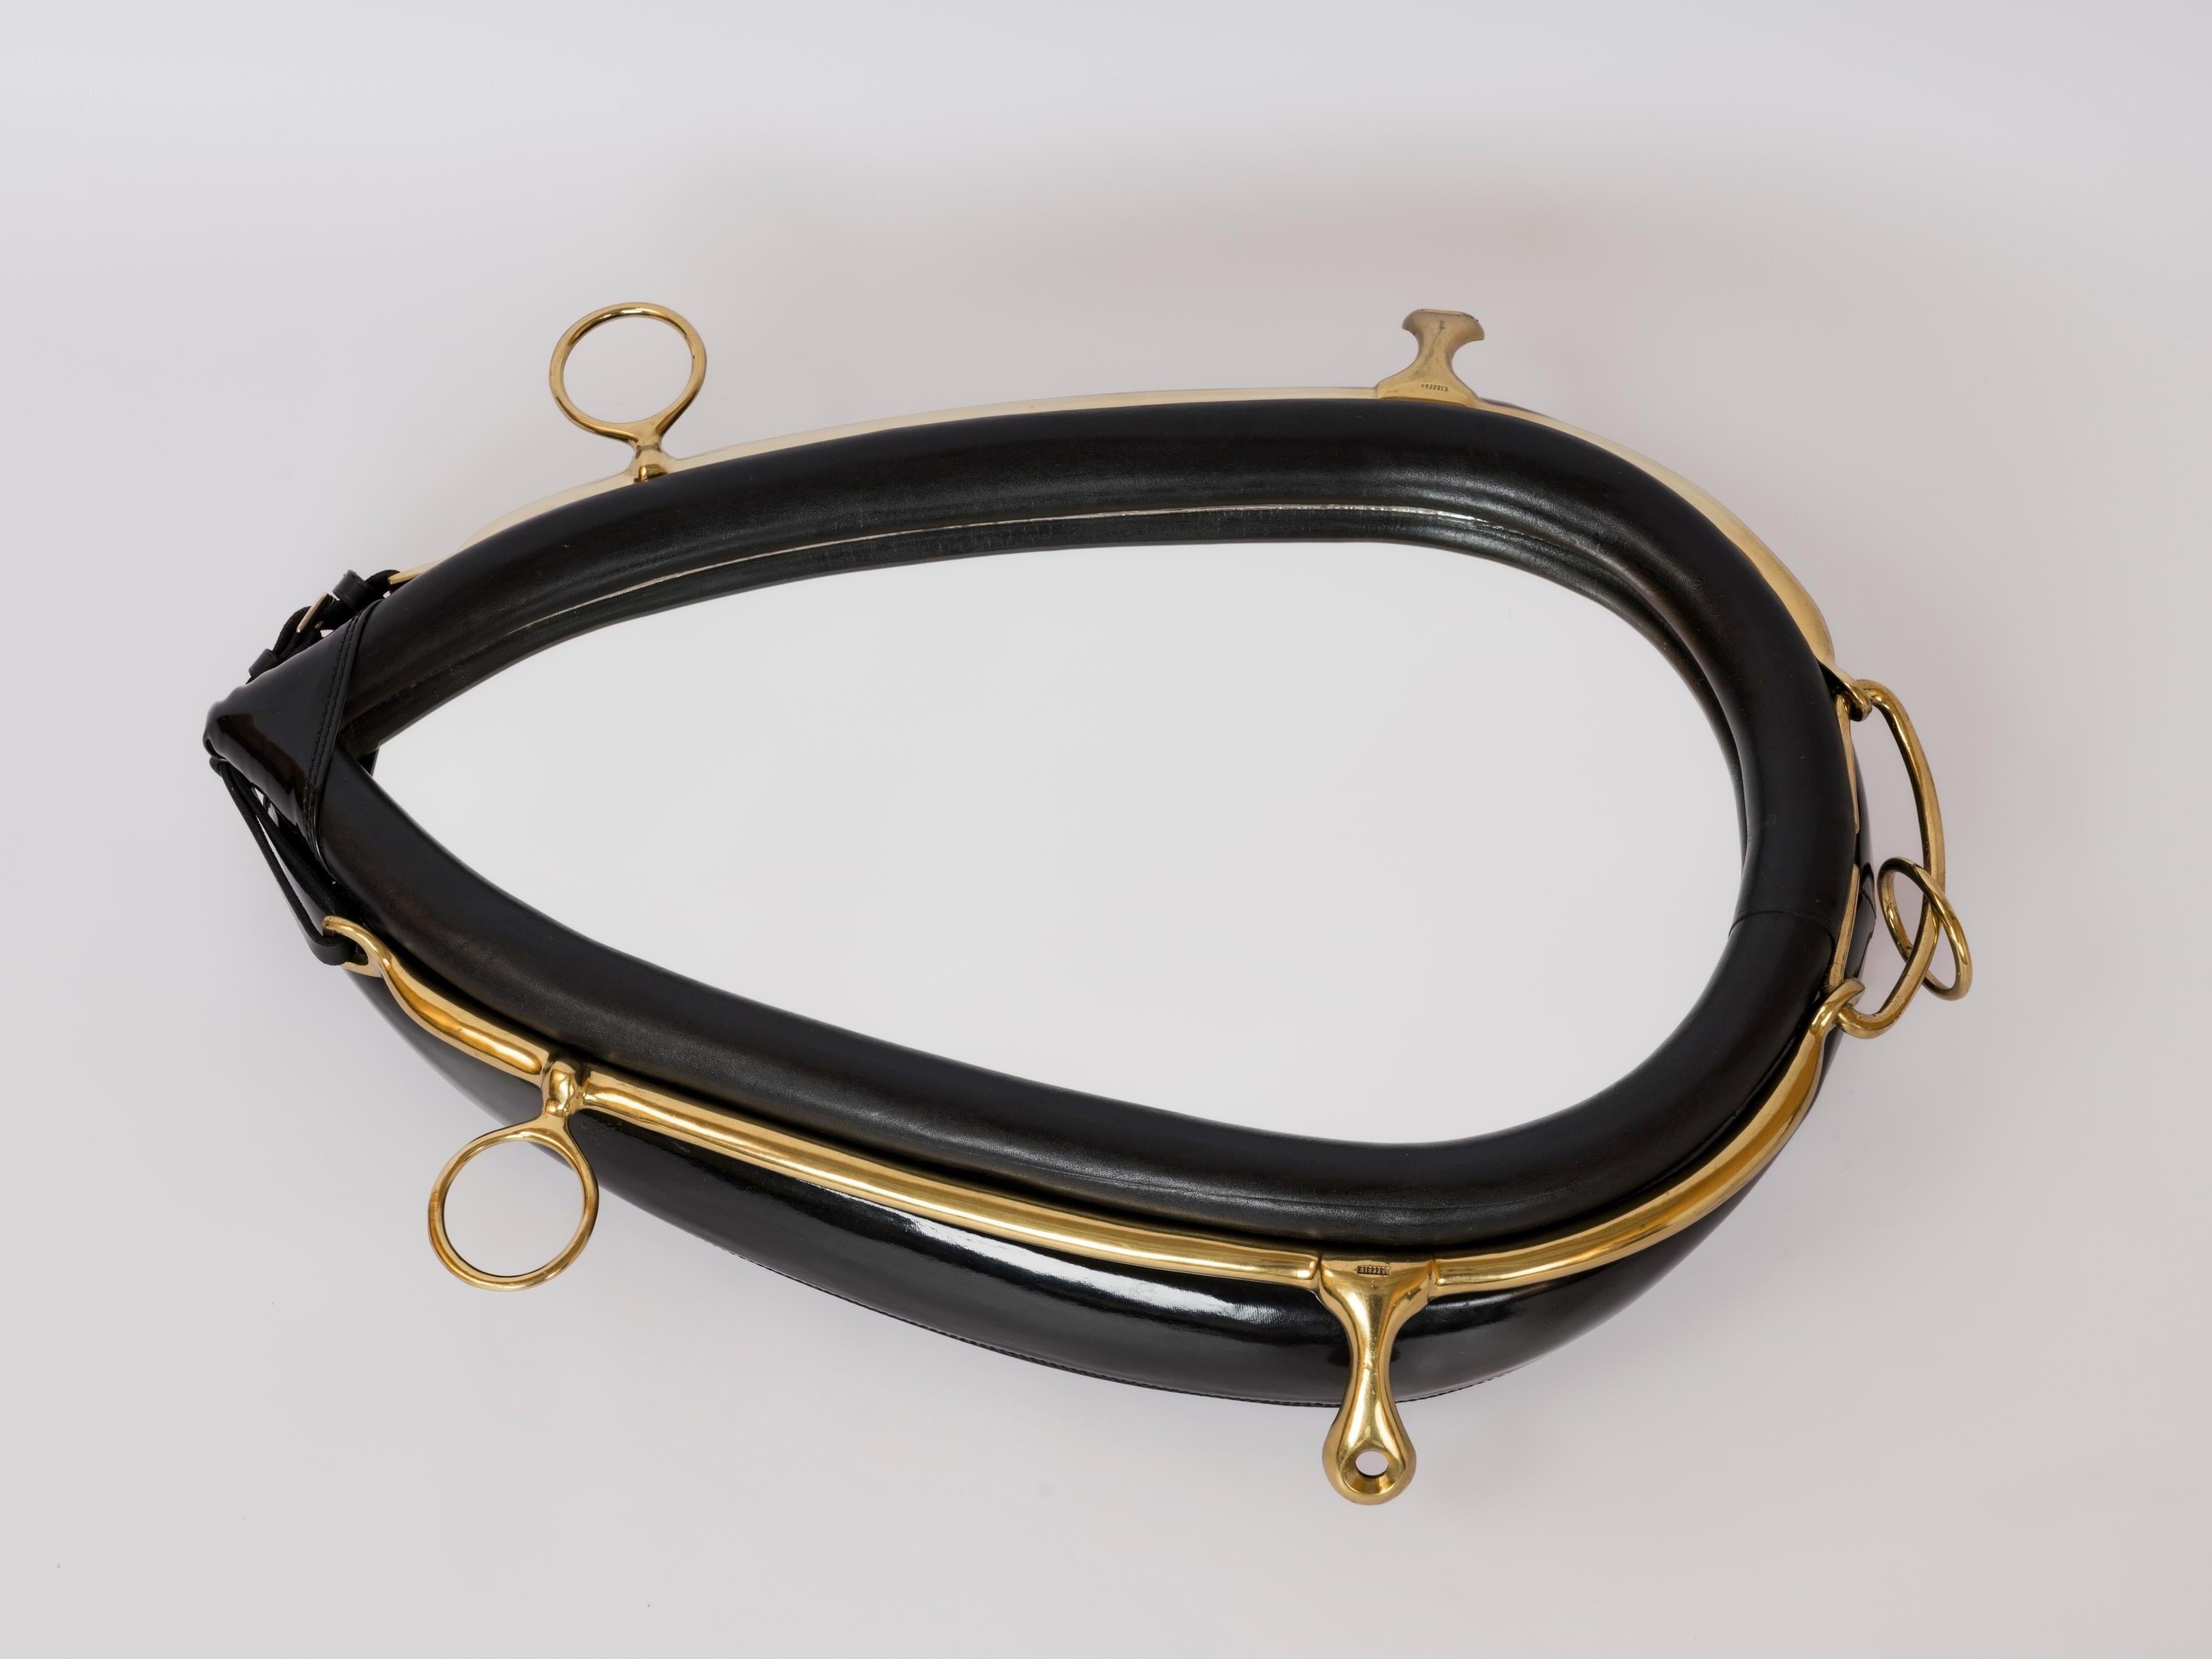 Padded Black Faux Leather & Brass Equestrian Mirror by Kieffer - France 1970's For Sale 4